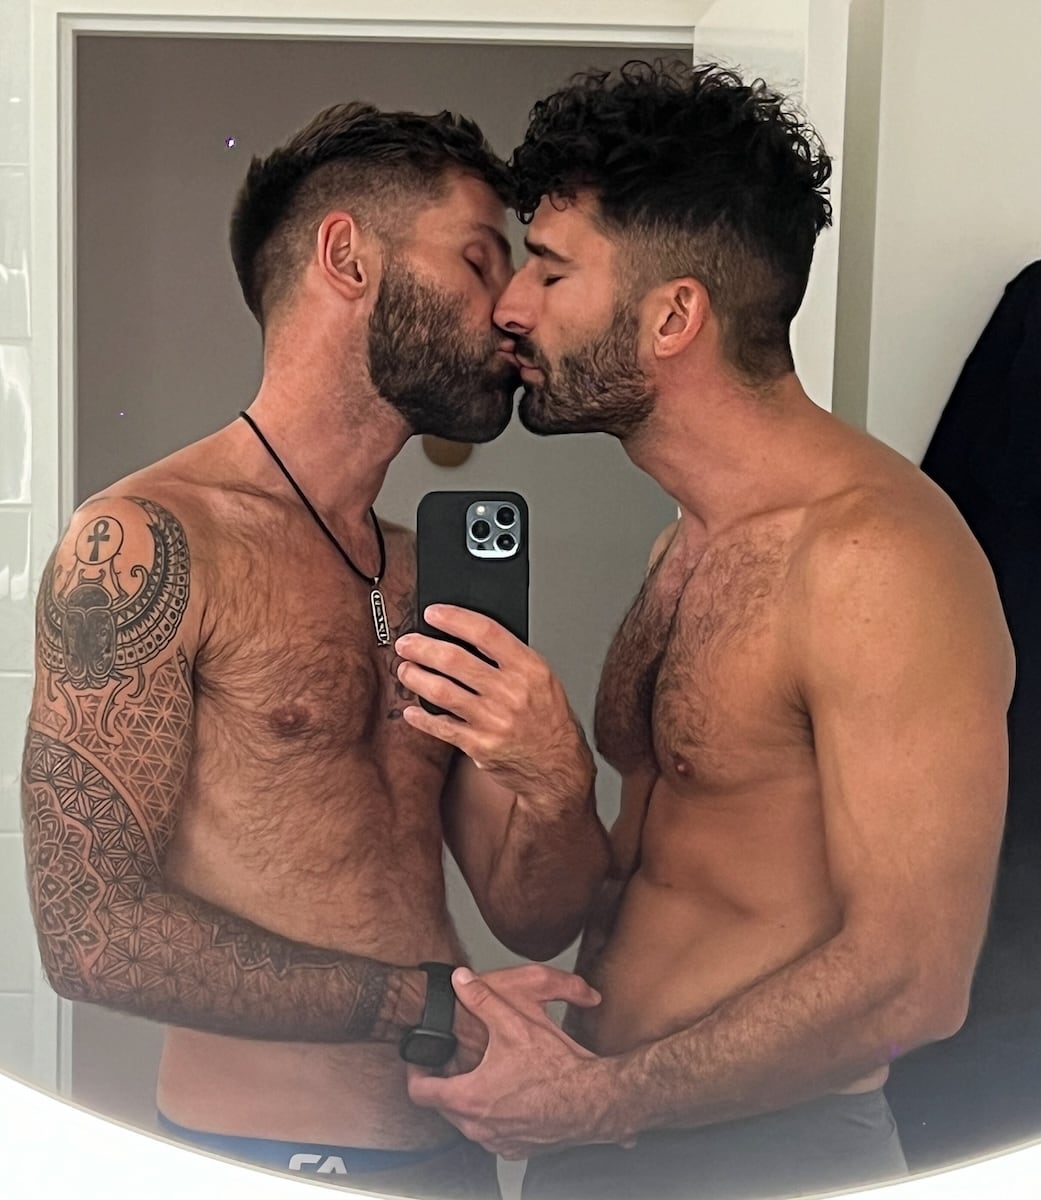 Romantic gay couple kiss in hotel room mirror.